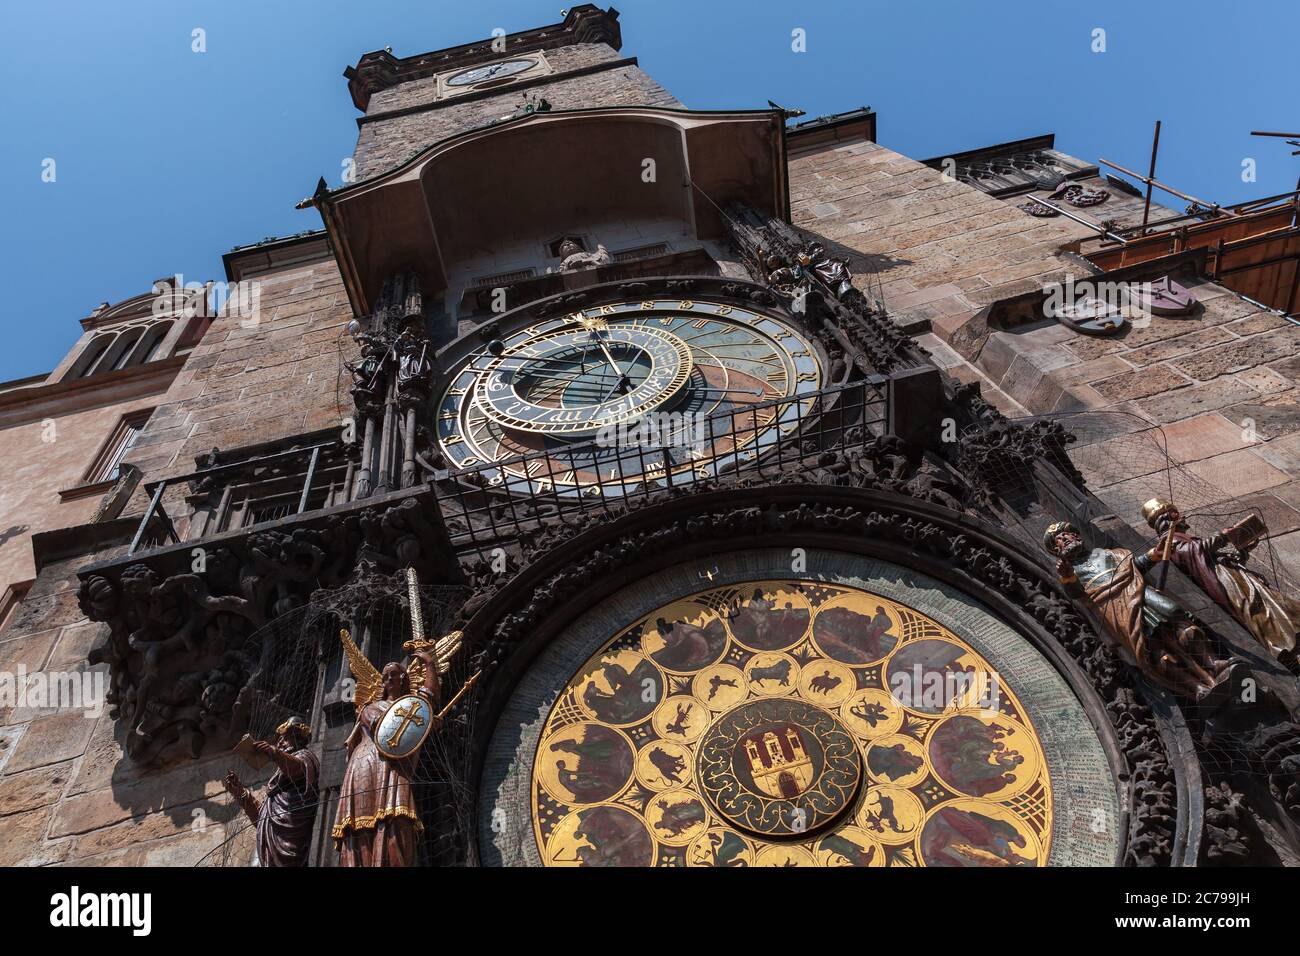 The Prague Astronomical Clock, or Prague Orloj, close-up view. It is a medieval astronomical clock located in Prague, the capital of the Czech Republi Stock Photo